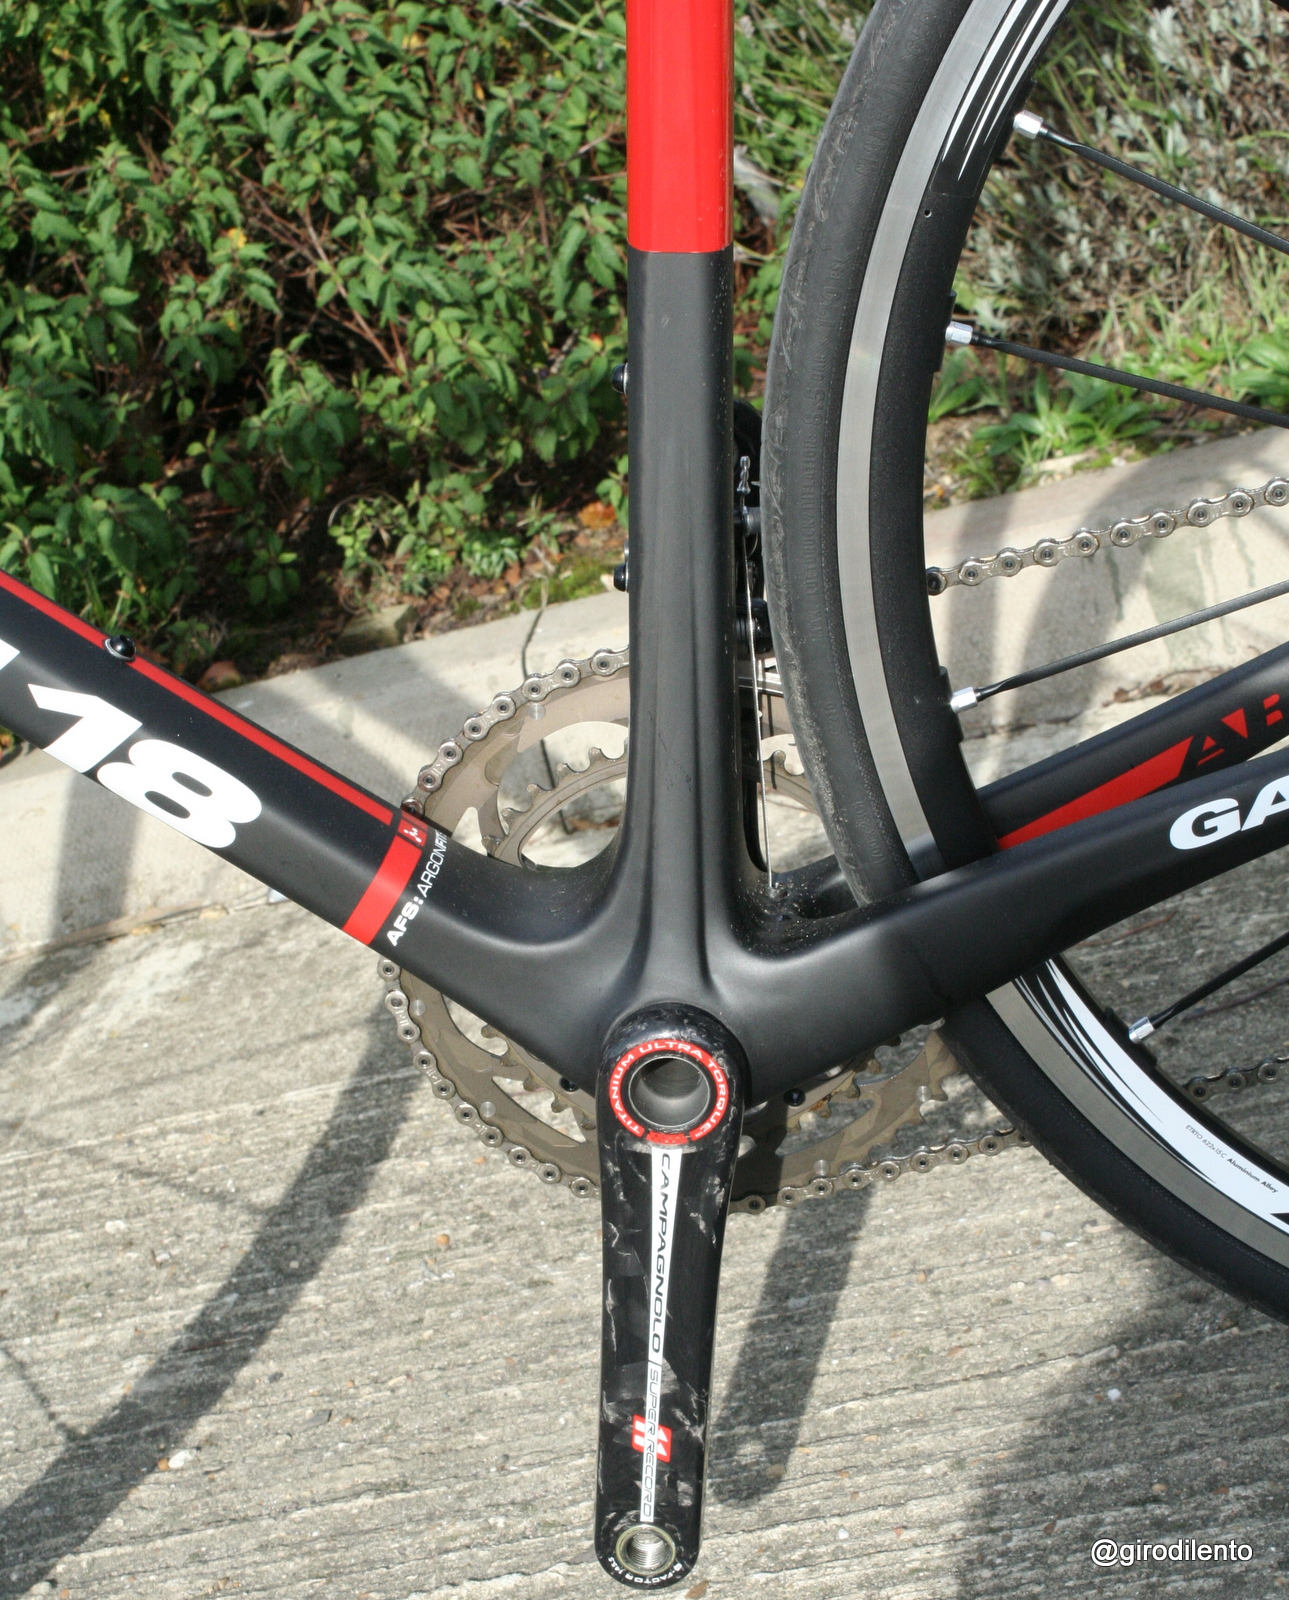 2014 Argon 18 Gallium Pro - interesting ribs on the seat tube for more rigidity at the base